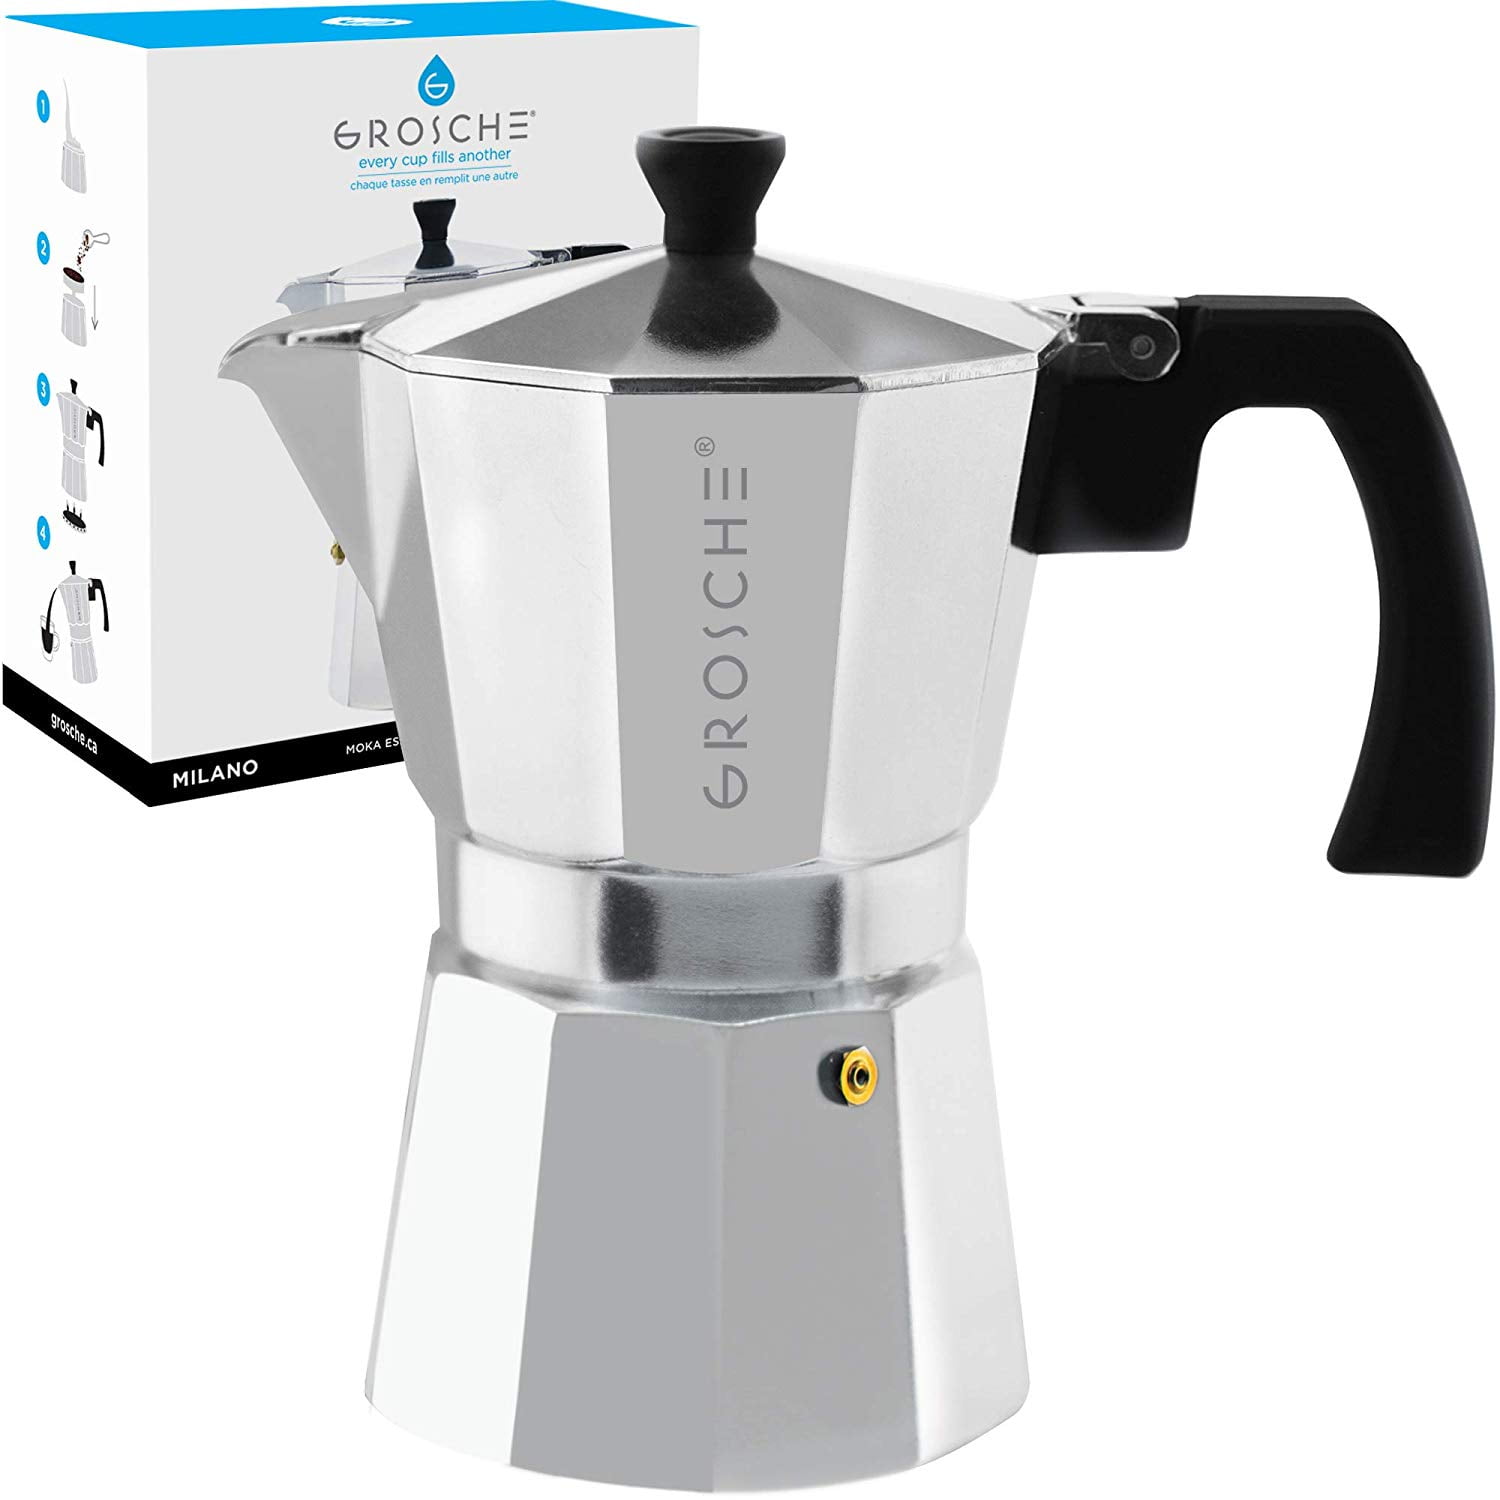  Grasseed Luxurious Crystal Glass & Stainless Steel Moka Pot,  Stovetop Espresso Maker for Flavored Strong Coffee, Italian Cafetera, for  all types of hobs-Dishwasher Safe-6 Espresso Cup/240 ml/8.5 oz: Home &  Kitchen